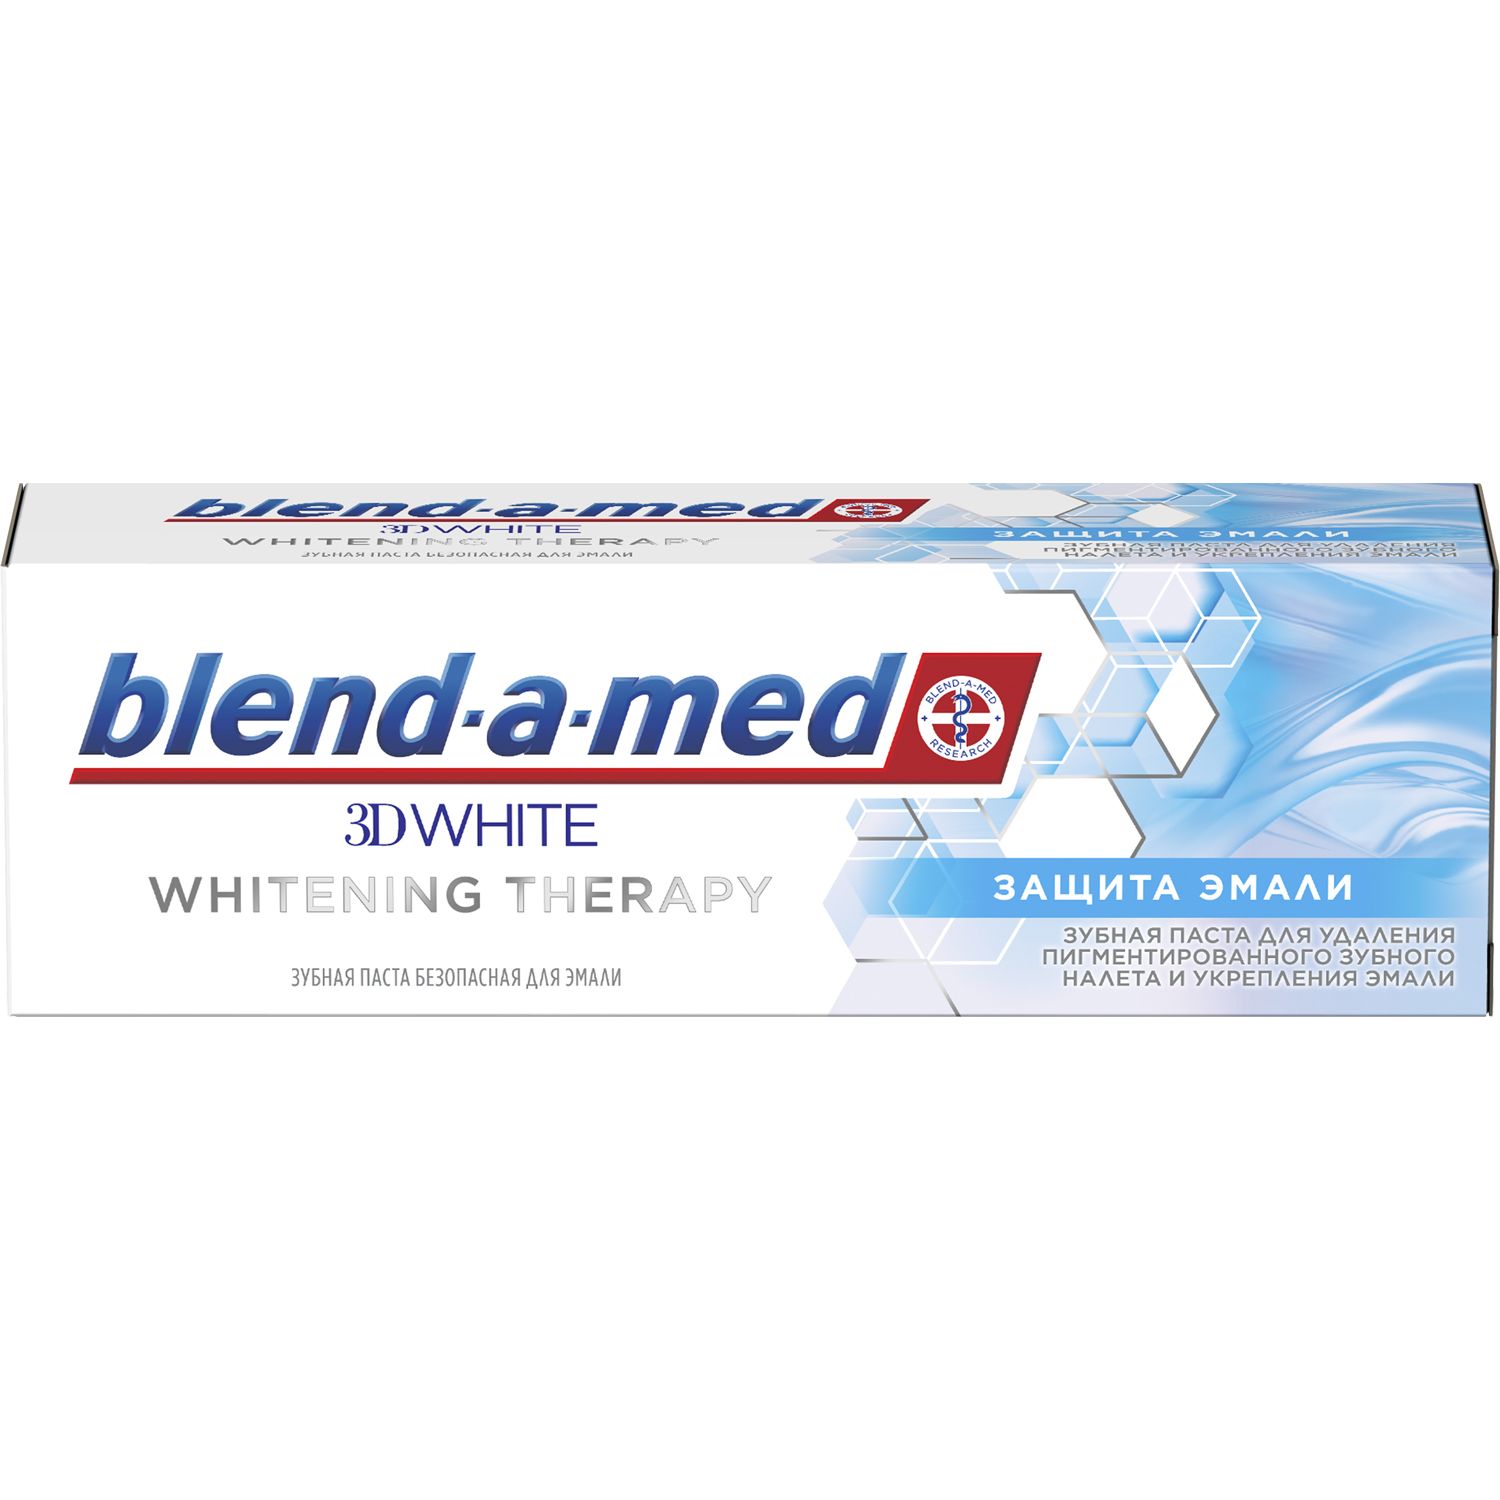 Зубна Паста Blend-a-med 3D White Whitening Therapy Захист зубної емалі 75 мл - фото 4